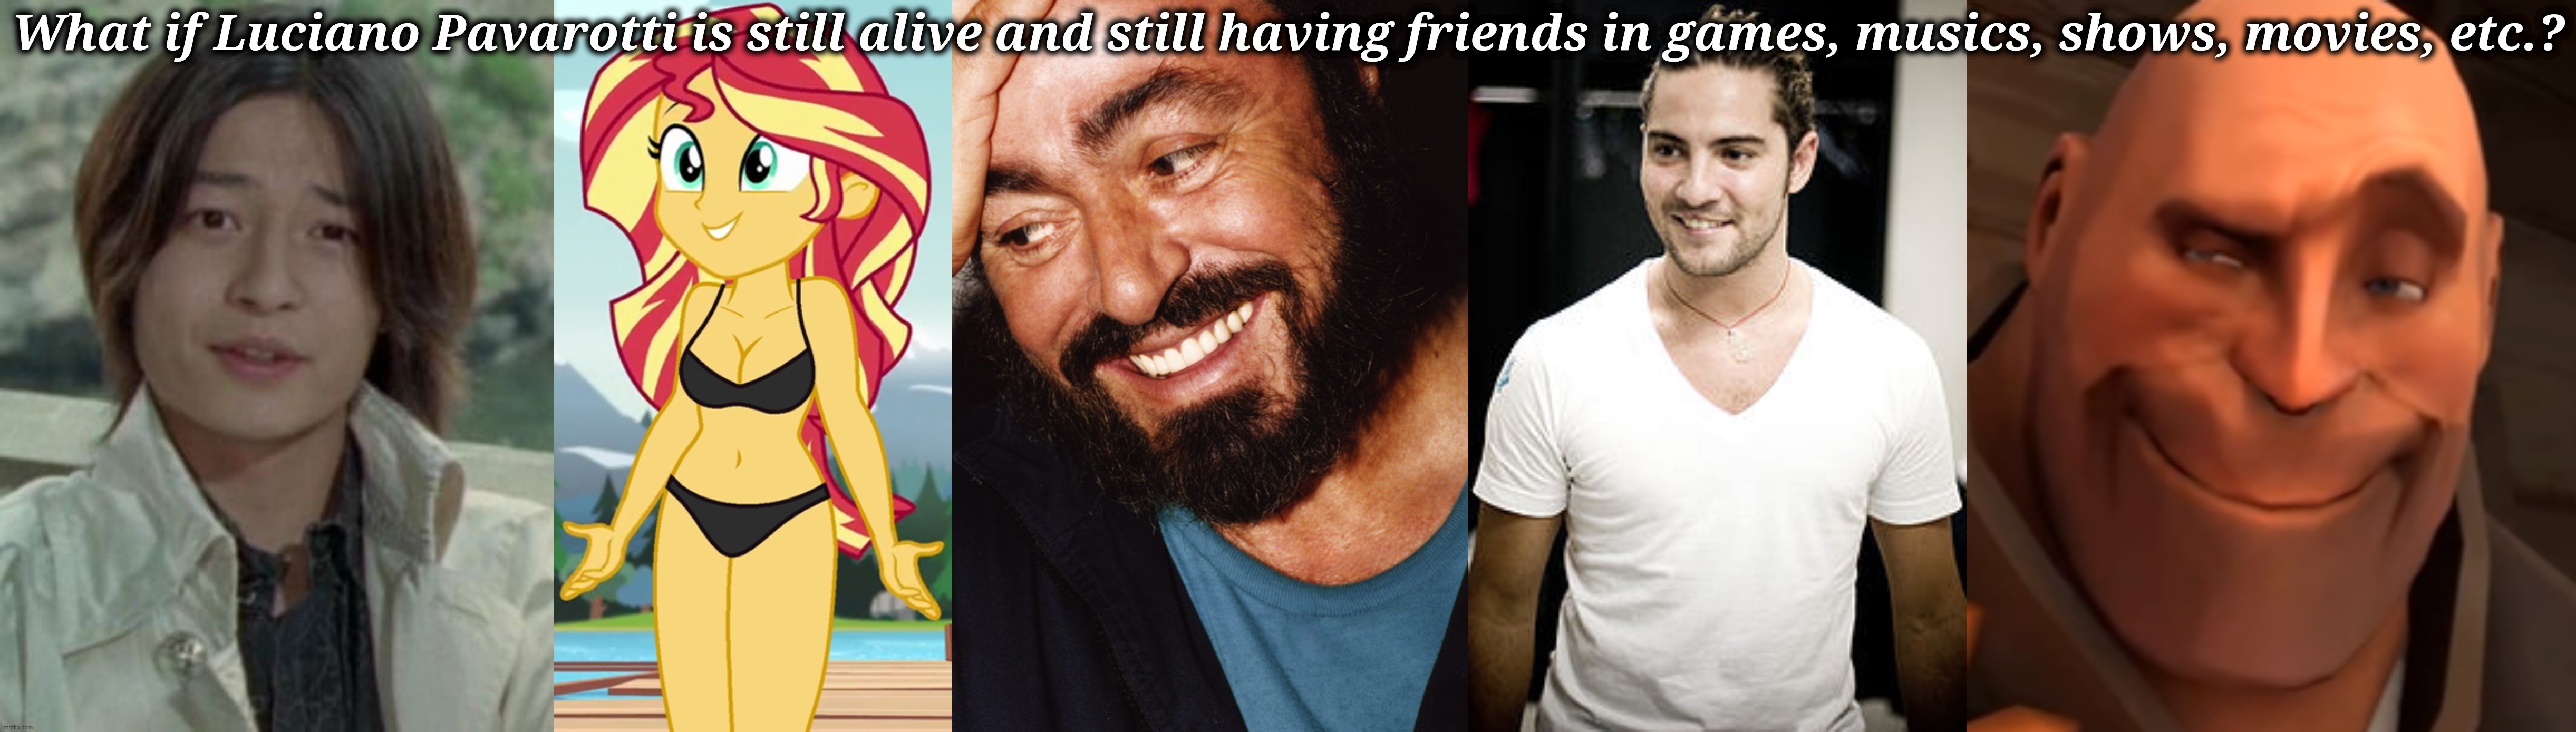 Pavarotti and his new friends Mikoto (played by Koutaro Tanaka) Heavy, Sunset and Bisbal (what if Pavarotti didn't die) | What if Luciano Pavarotti is still alive and still having friends in games, musics, shows, movies, etc.? | image tagged in luciano pavarotti,memes,tf2 heavy,sunset shimmer,david bisbal,abarekiller | made w/ Imgflip meme maker